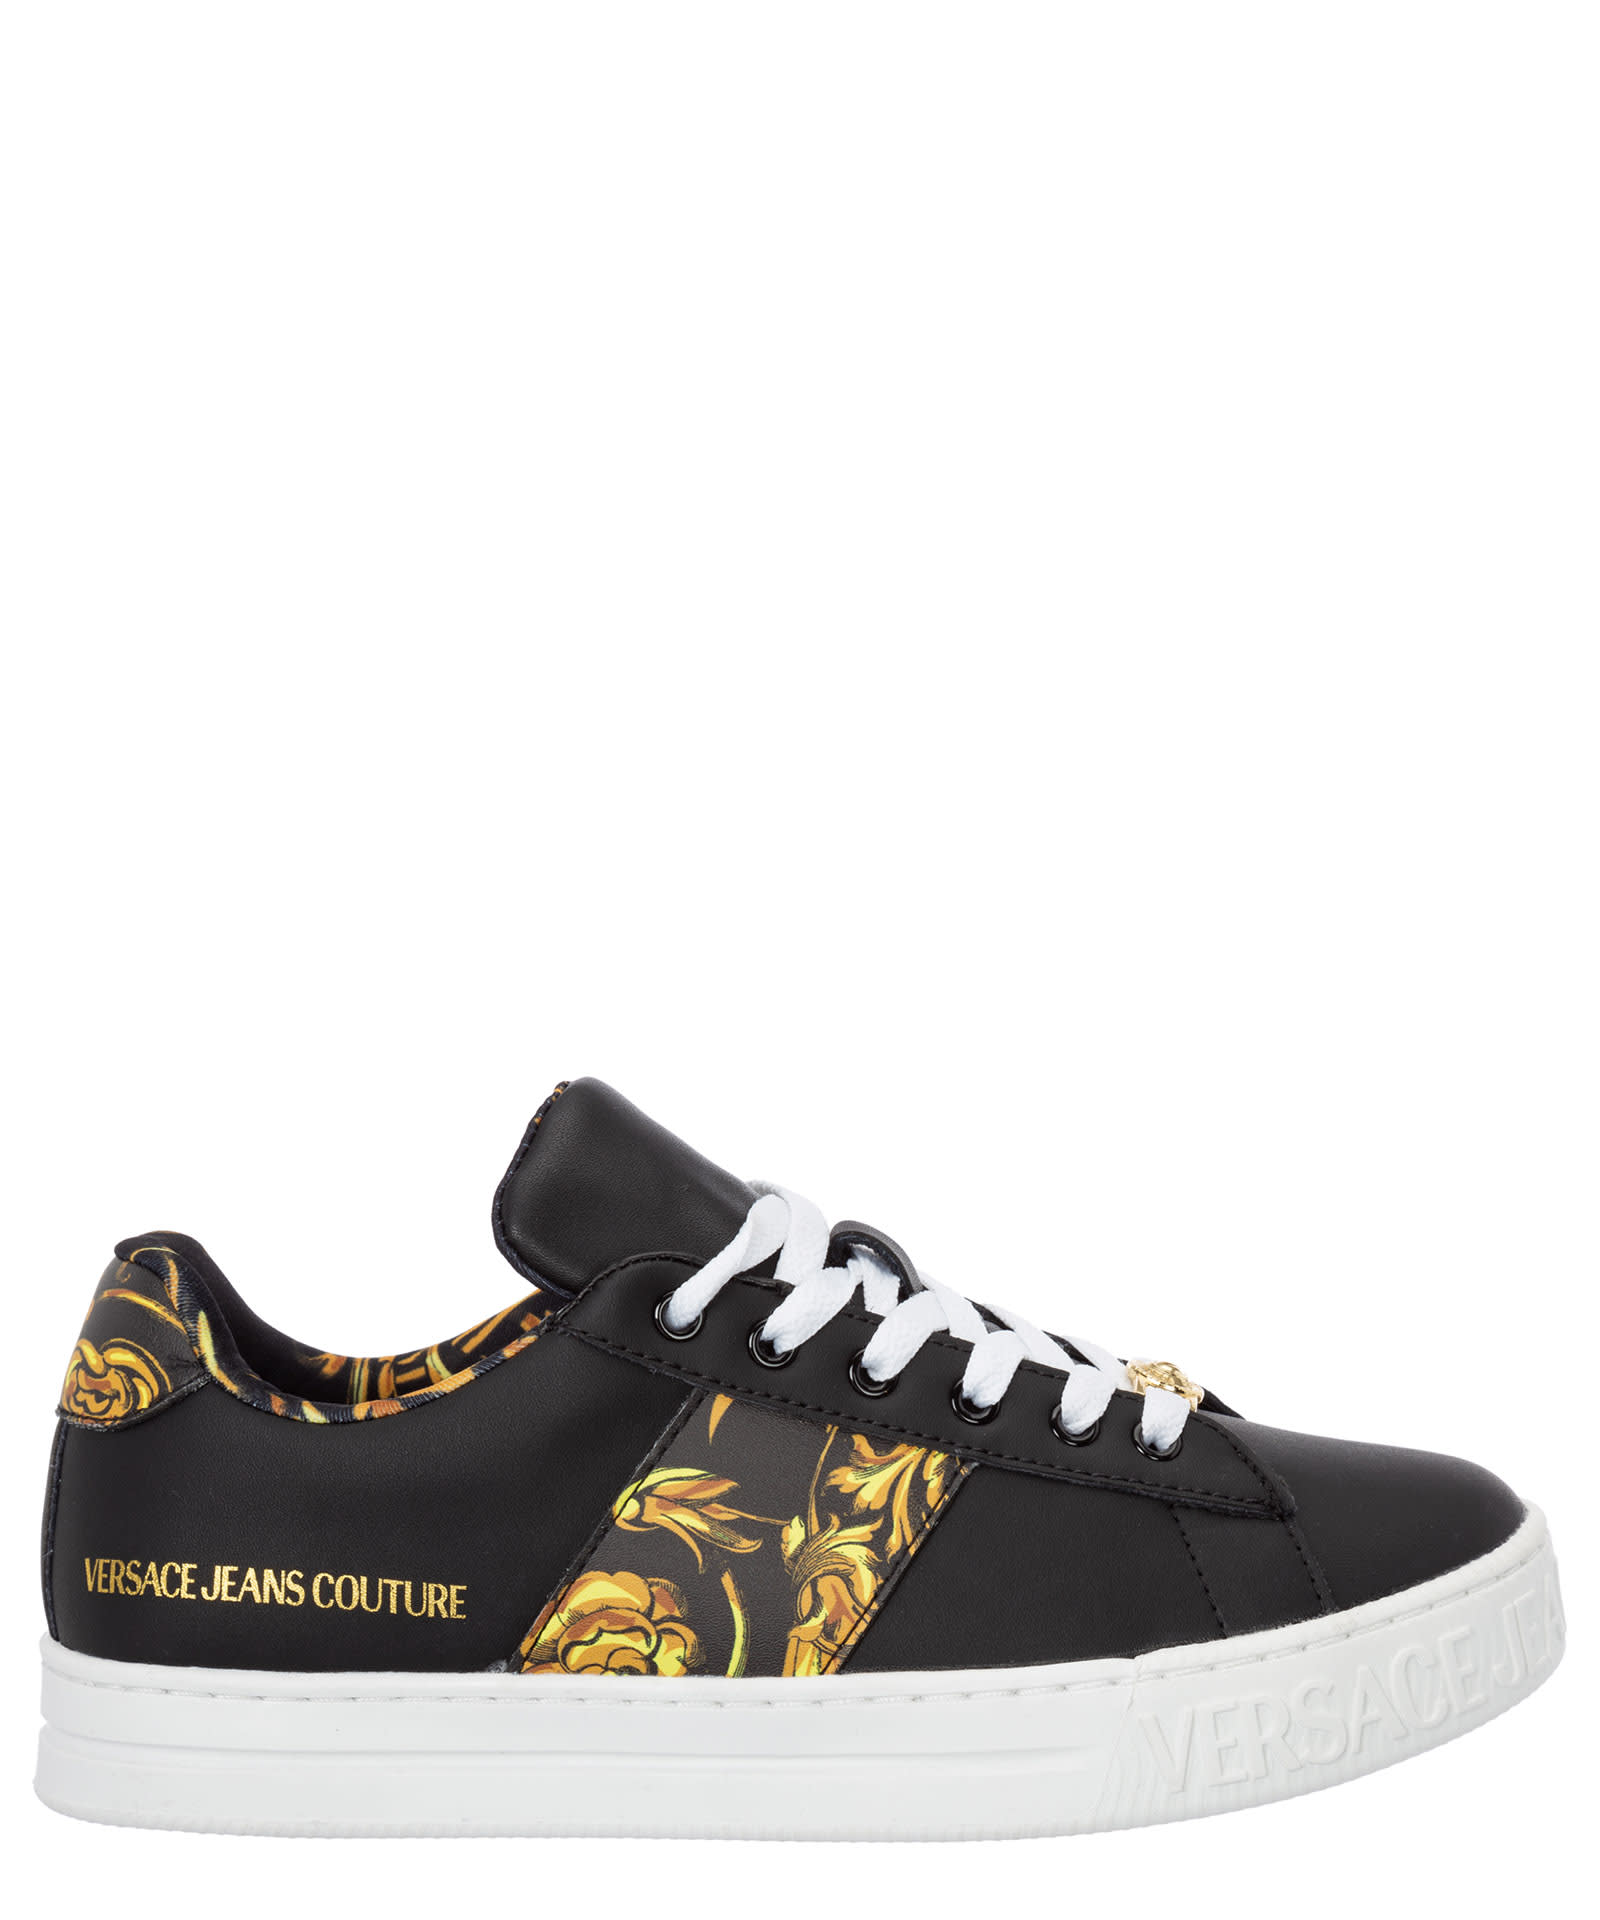 Versace Jeans Couture Court 88 Garland Leather Sneakers